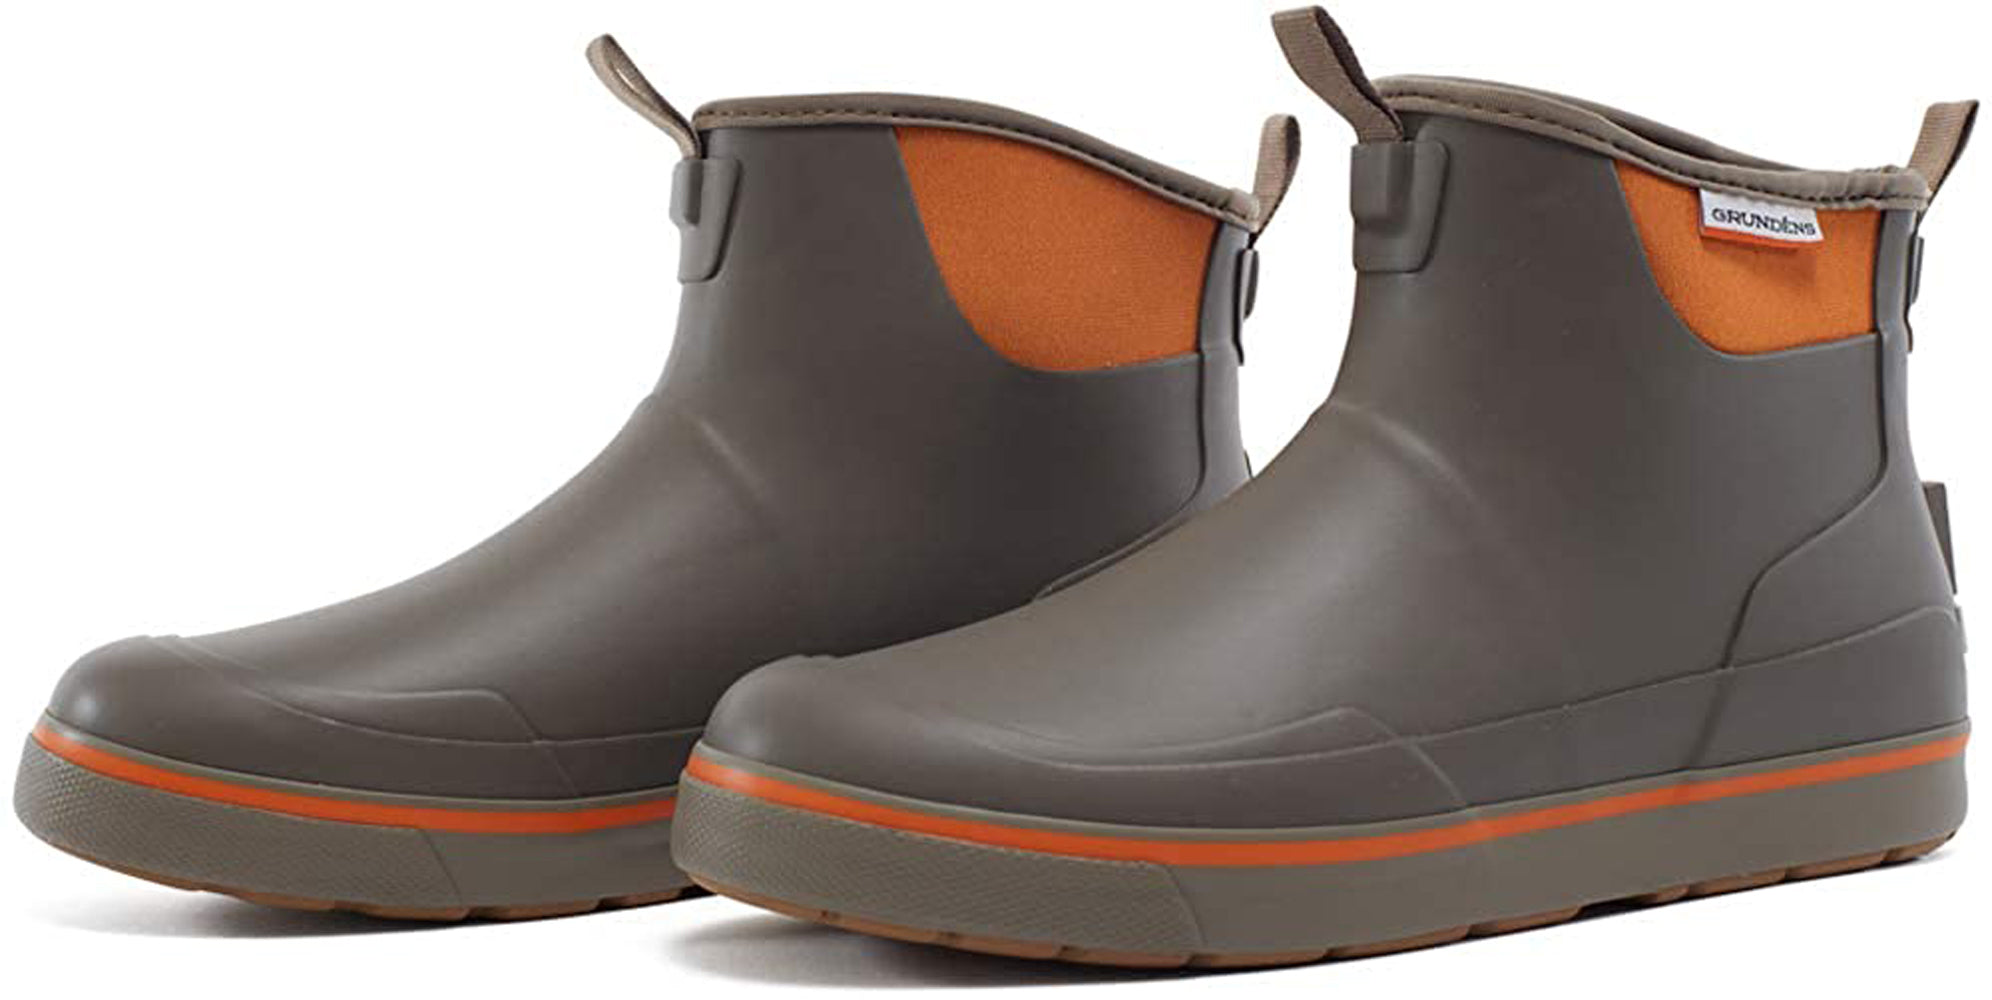 Deck-Boss Ankle Boot in Brindle color from the side view